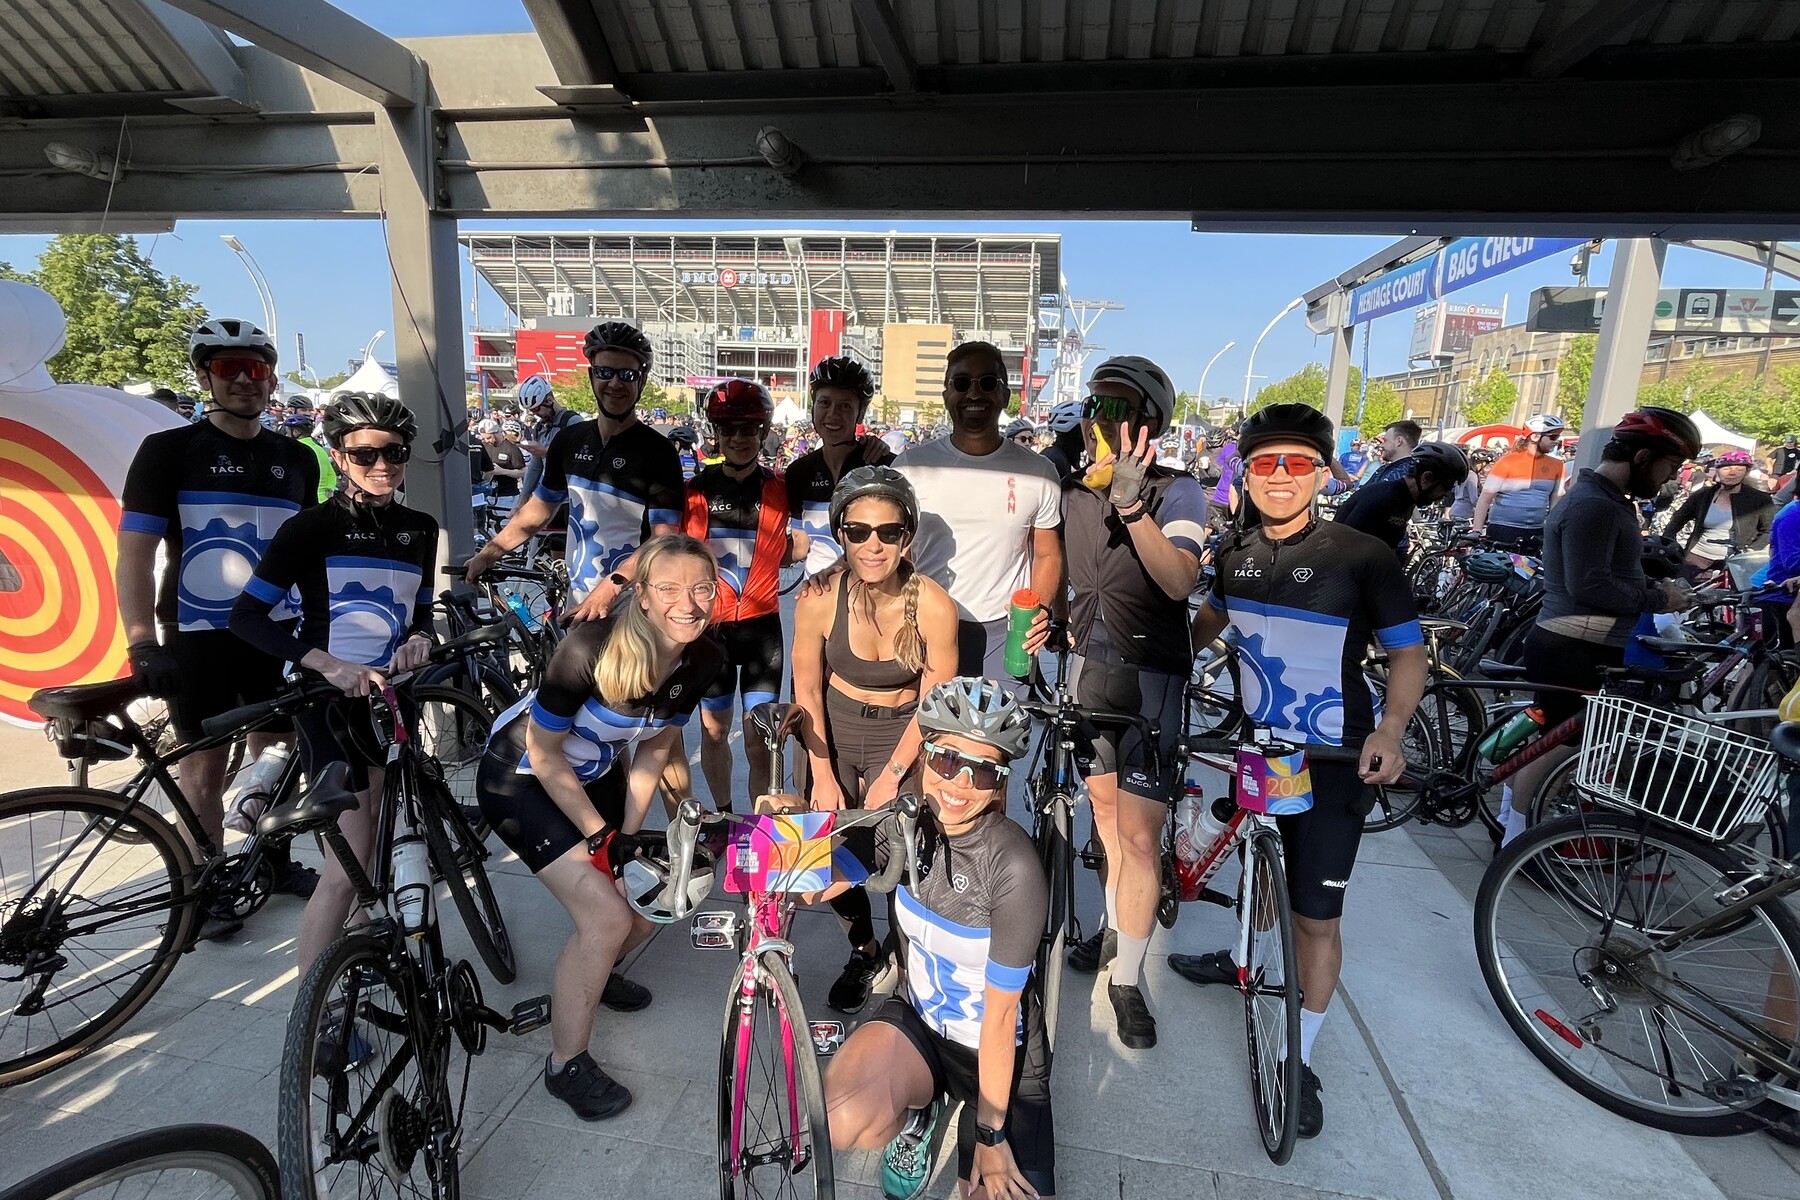 Members of the The Toronto Anesthesia Cycling Club 